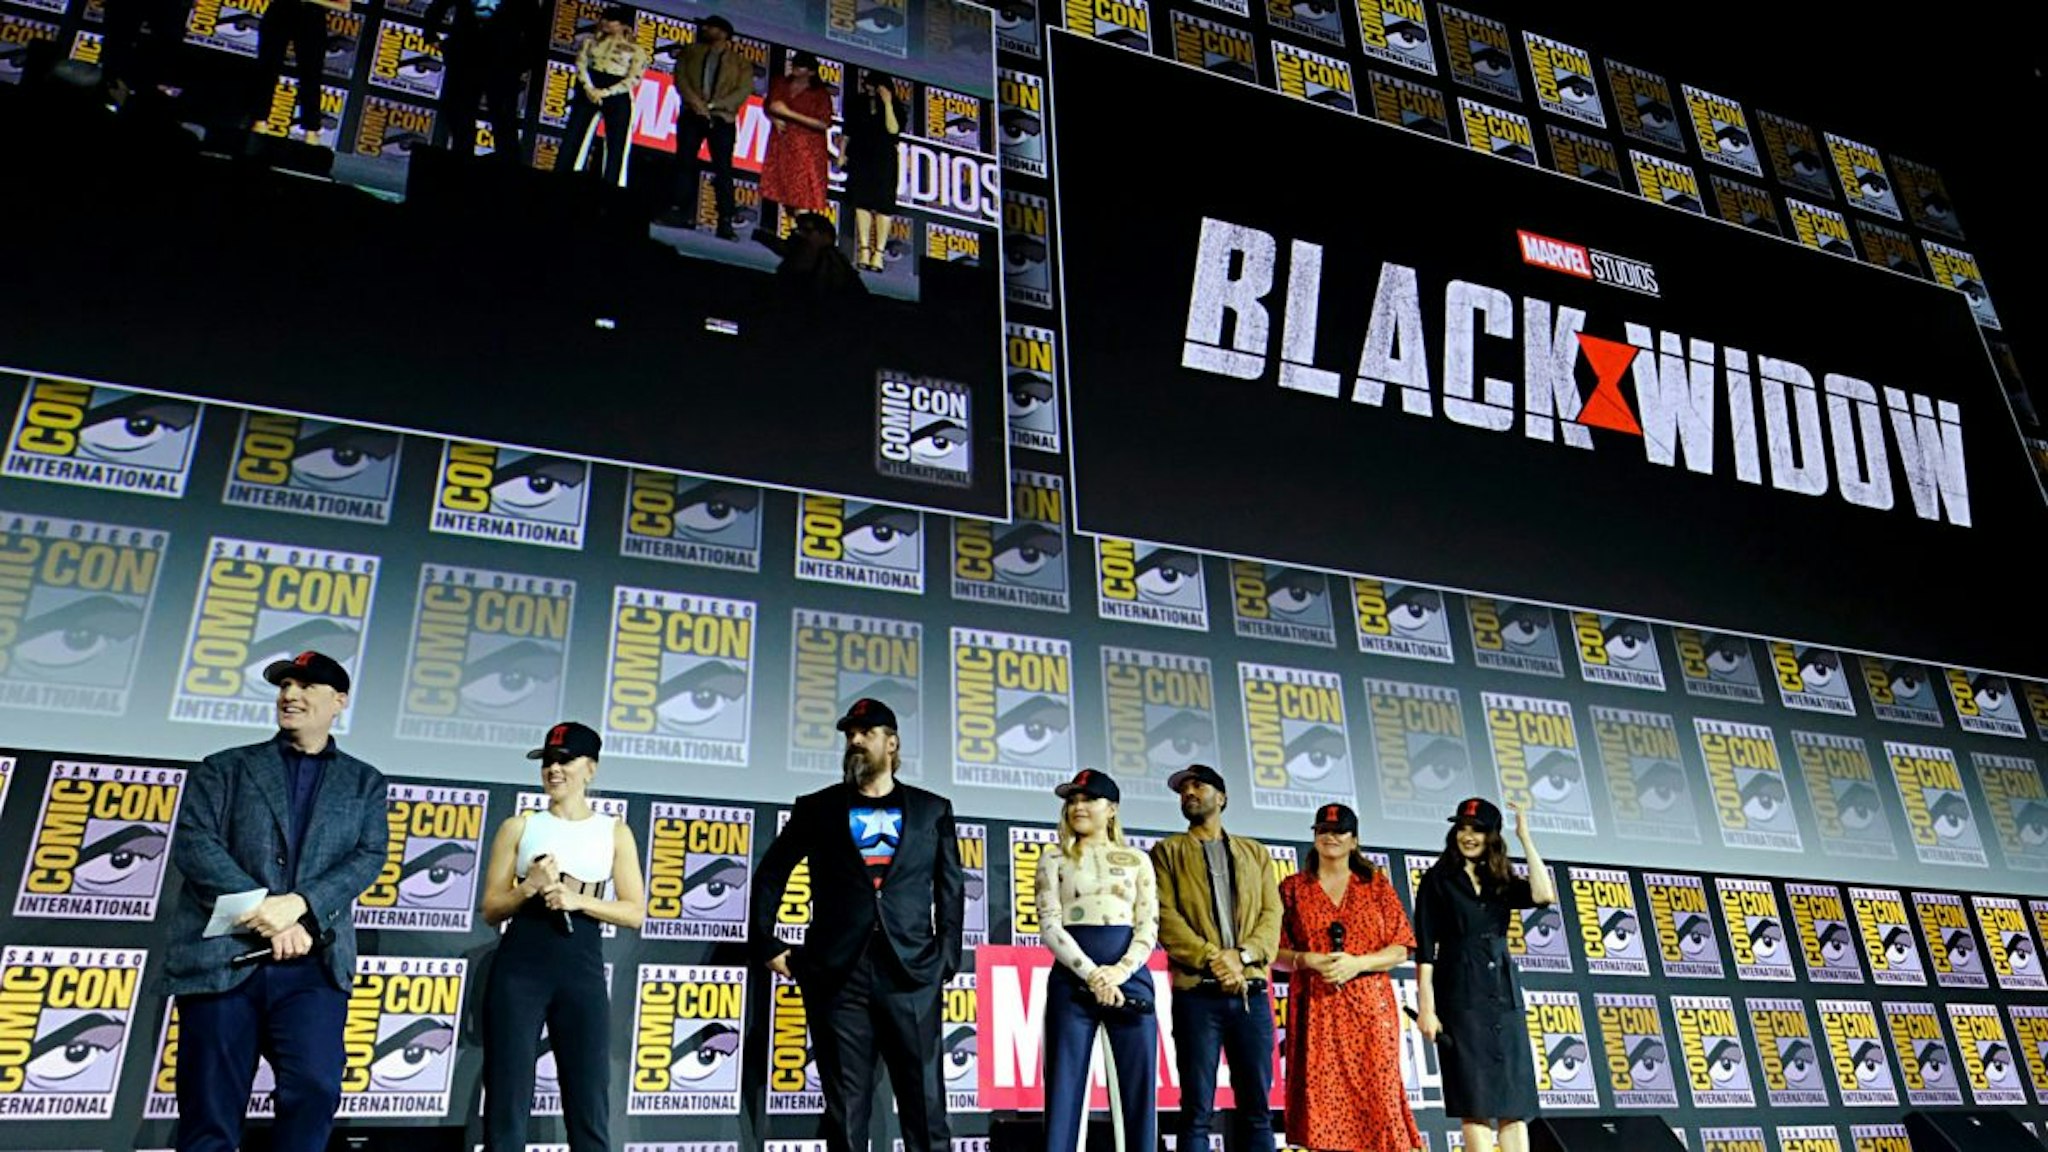 President of Marvel Studios Kevin Feige, Scarlett Johansson, David Harbour, Florence Pugh, O-T Fagbenle, Director Cate Shortland and Rachel Weisz of Marvel Studios' 'Black Widow' at the San Diego Comic-Con International 2019 Marvel Studios Panel in Hall H on July 20, 2019 in San Diego, California.